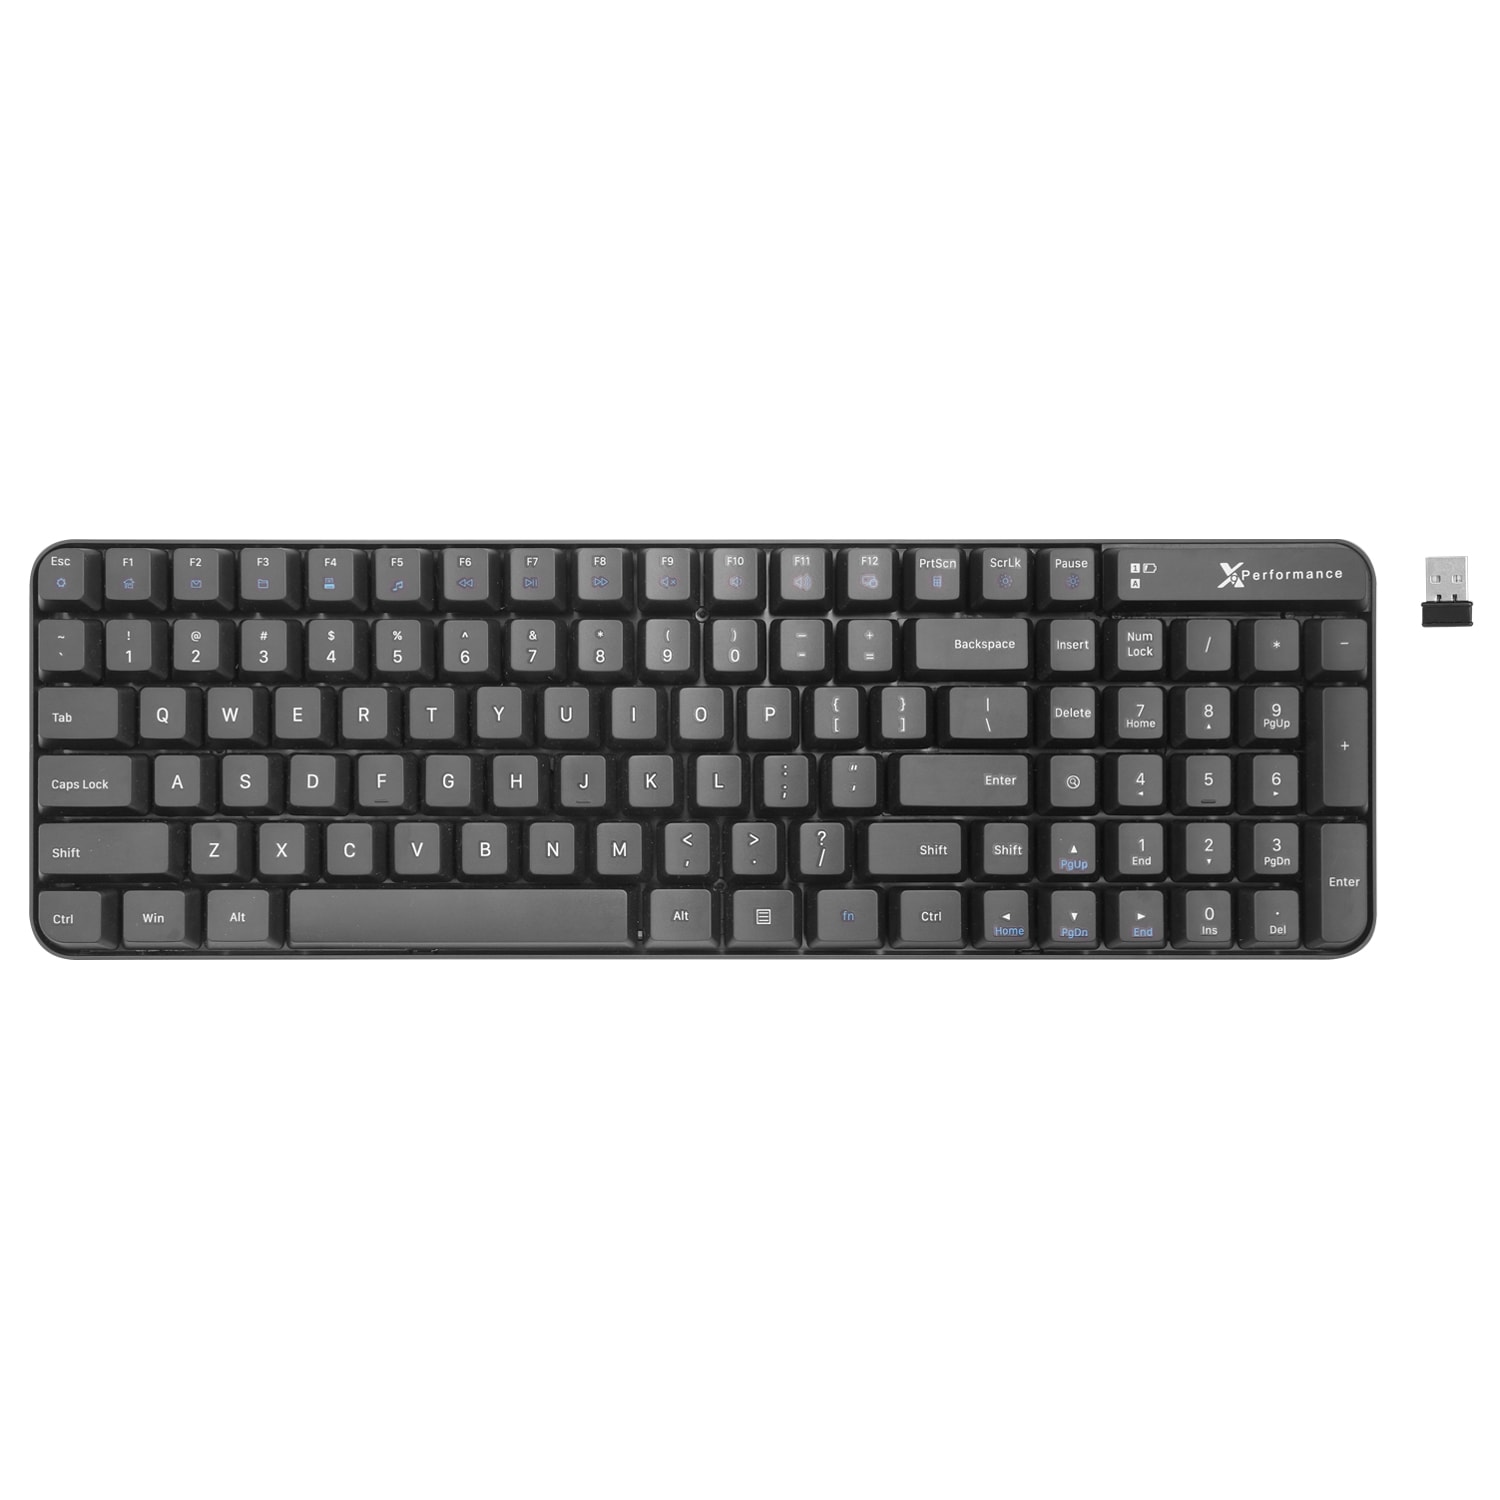 Macally X9 Performance Small Wireless Keyboard - 20% Reduction in Size -  Minimalistic Full Size Wireless Keyboard with 102 Keys and Number Pad -  Save Space with a 2.4Ghz RF Compact Keyboard